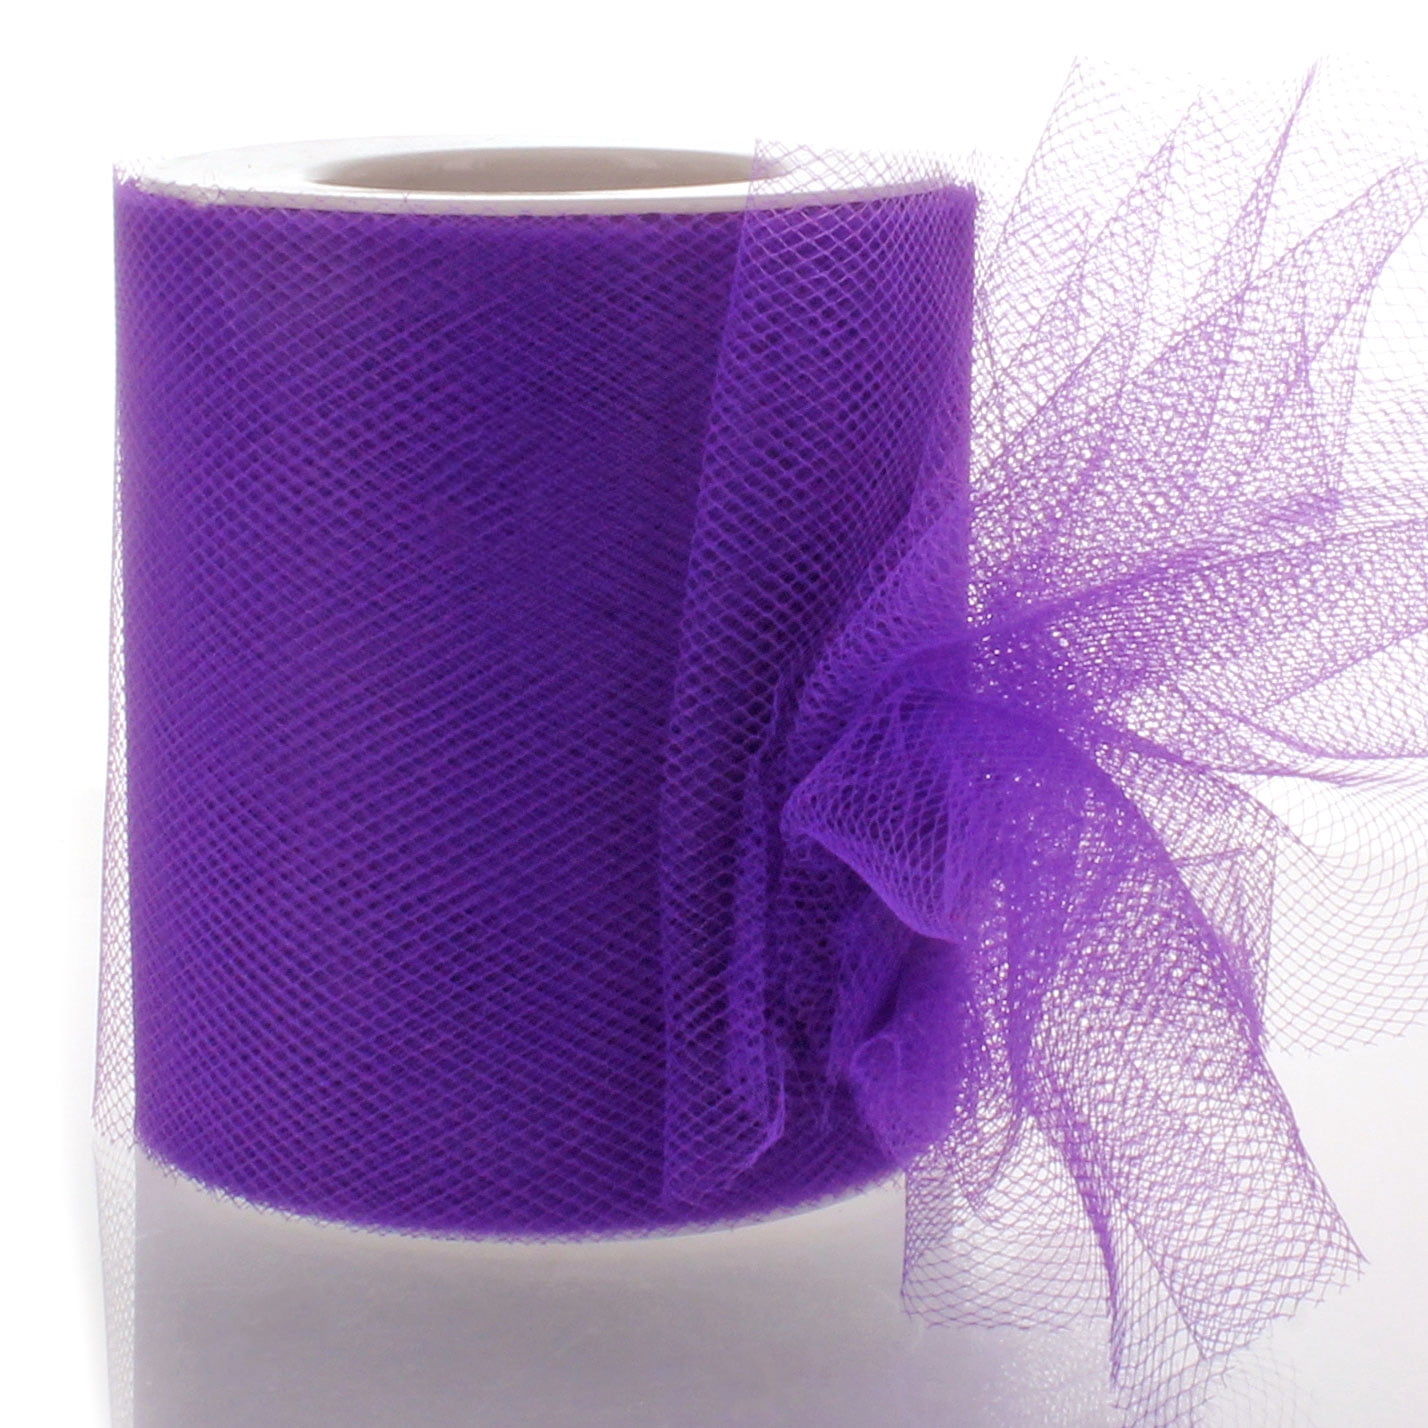 25Yd Tutu Tulle Fabric Spool Rolls Gifts Sewing Gift Wrapping Bows Wedding Decor 